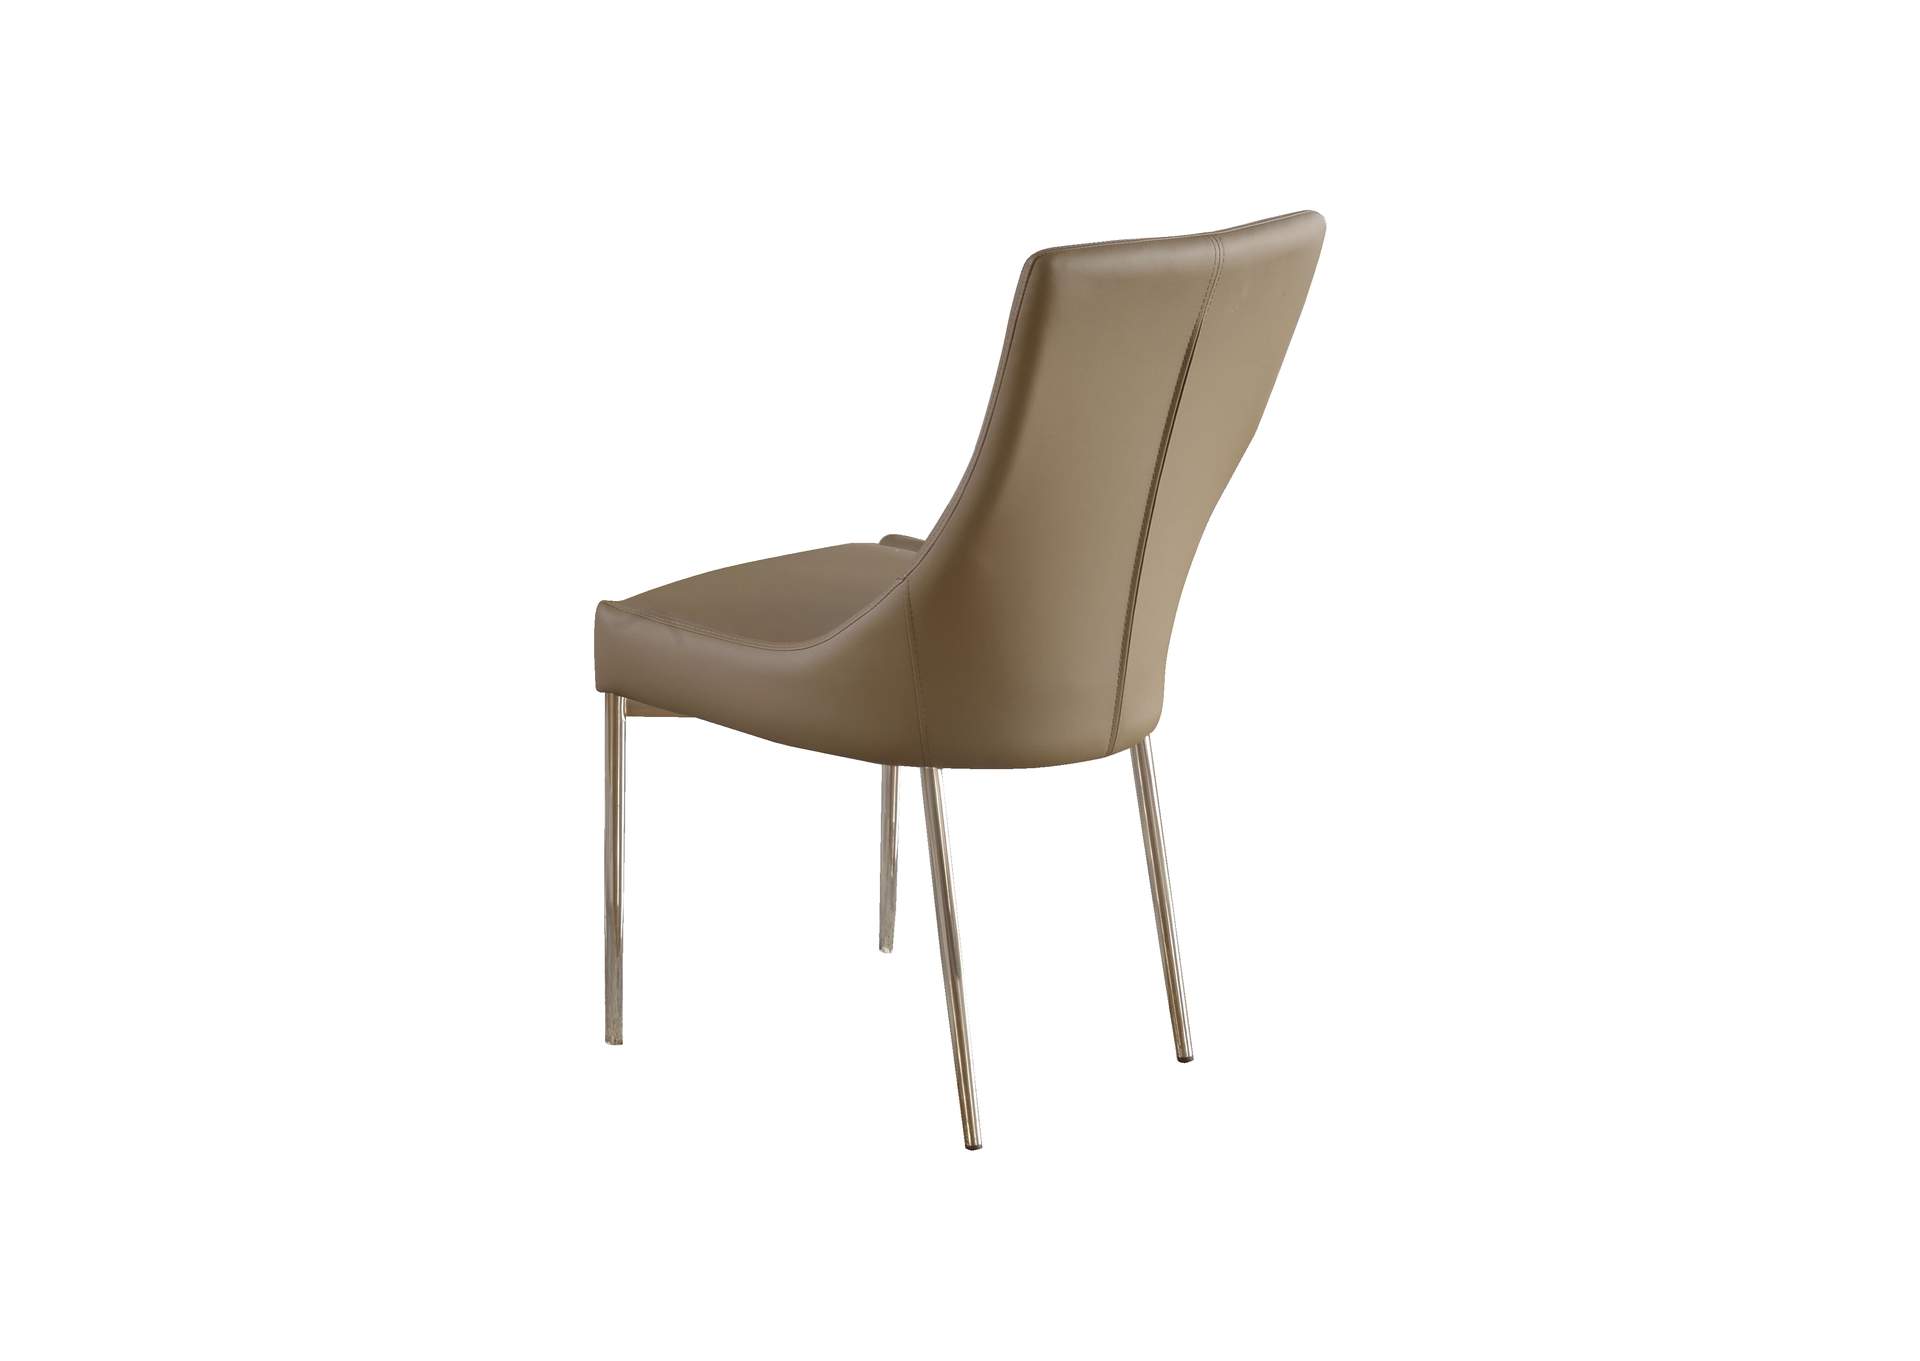 Contemporary Club-Style Dining Chair,Chintaly Imports